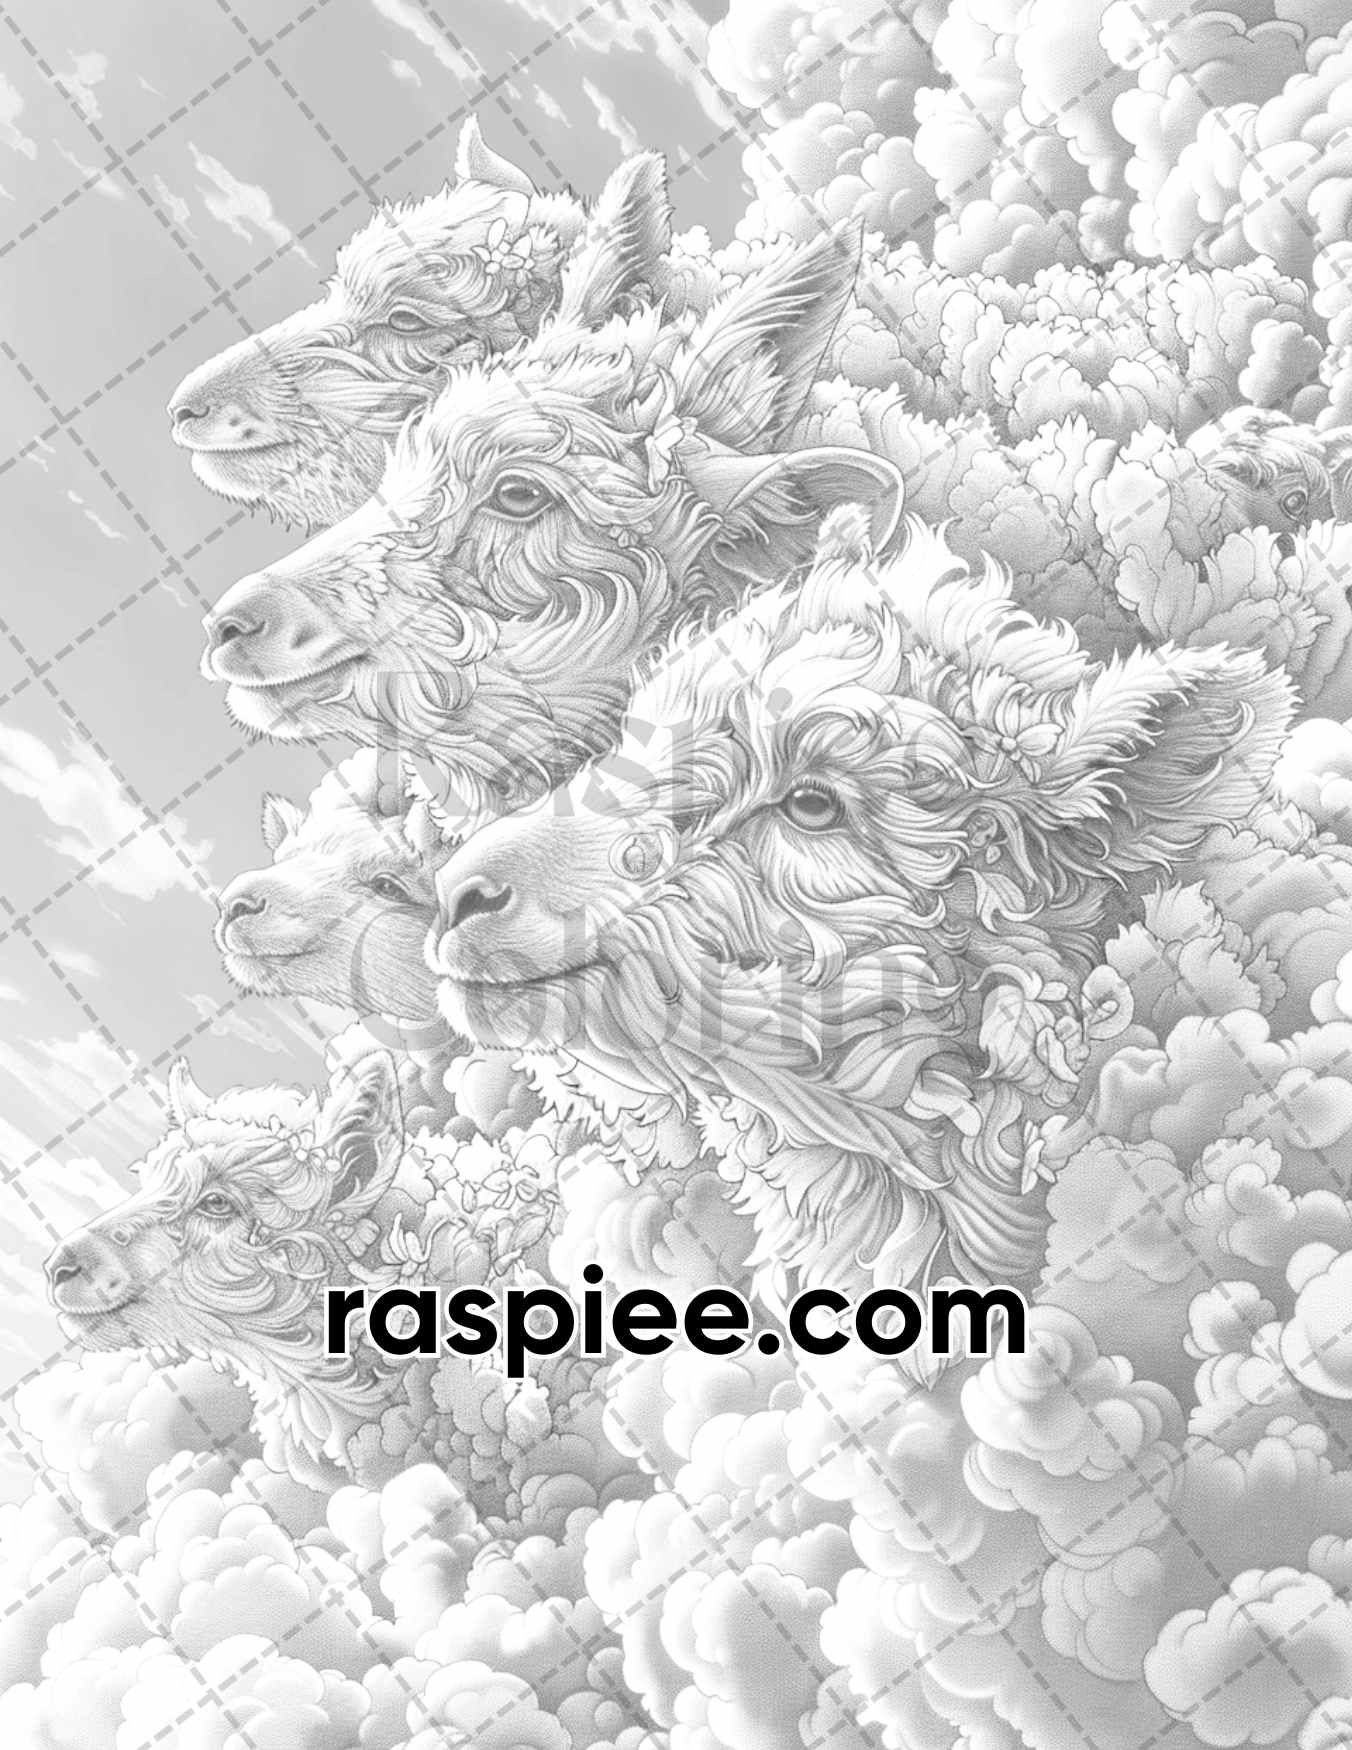 adult coloring pages, adult coloring sheets, adult coloring book pdf, adult coloring book printable, grayscale coloring pages, grayscale coloring books, animal coloring pages for adults, animal coloring book, grayscale illustration, fantasy coloring pages, fantasy coloring book